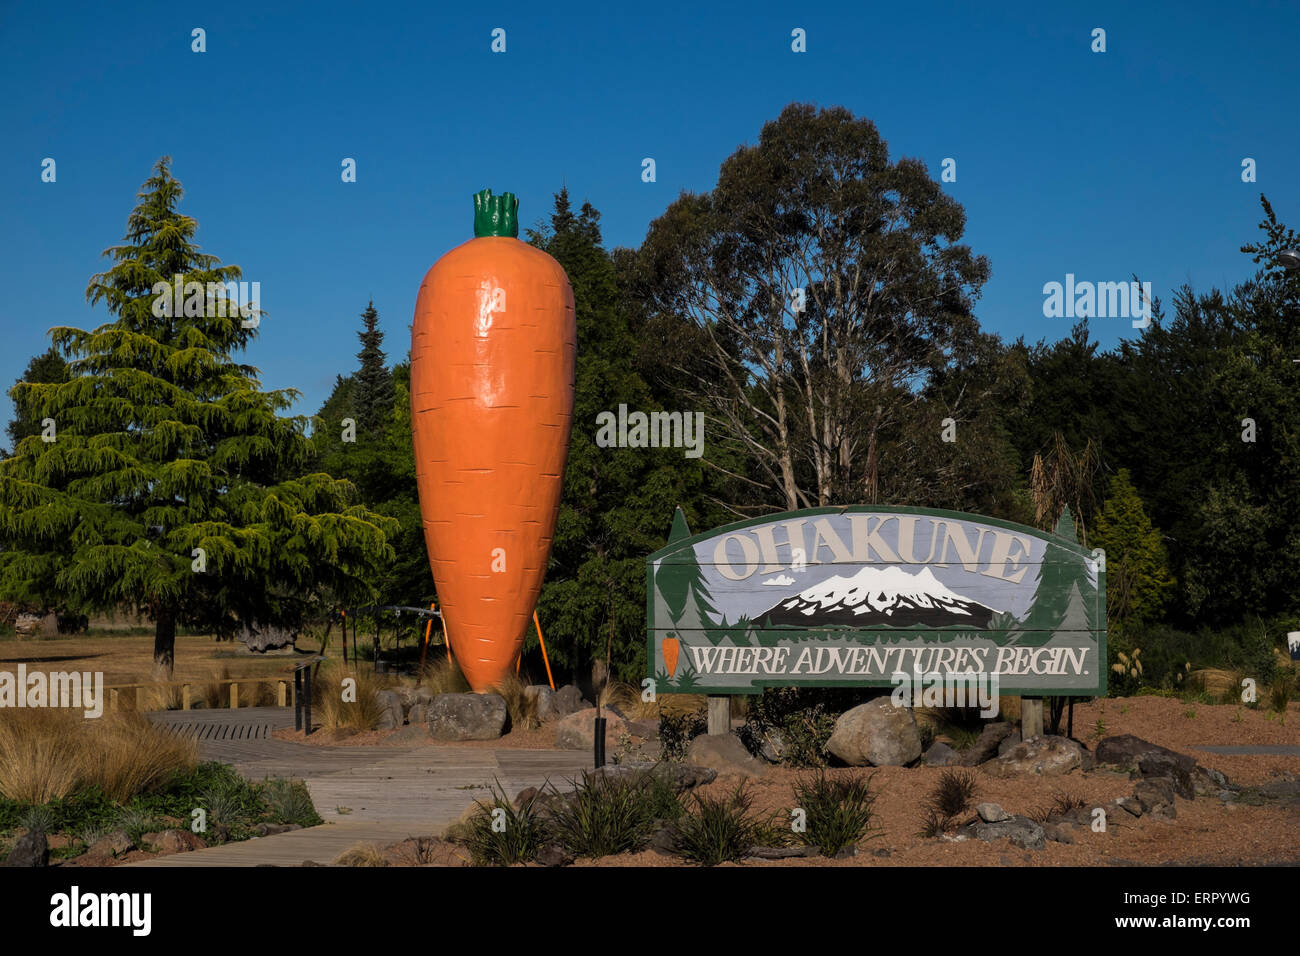 Giant carrott welcomes visitors to the town of Ohakune in New zealand. Stock Photo